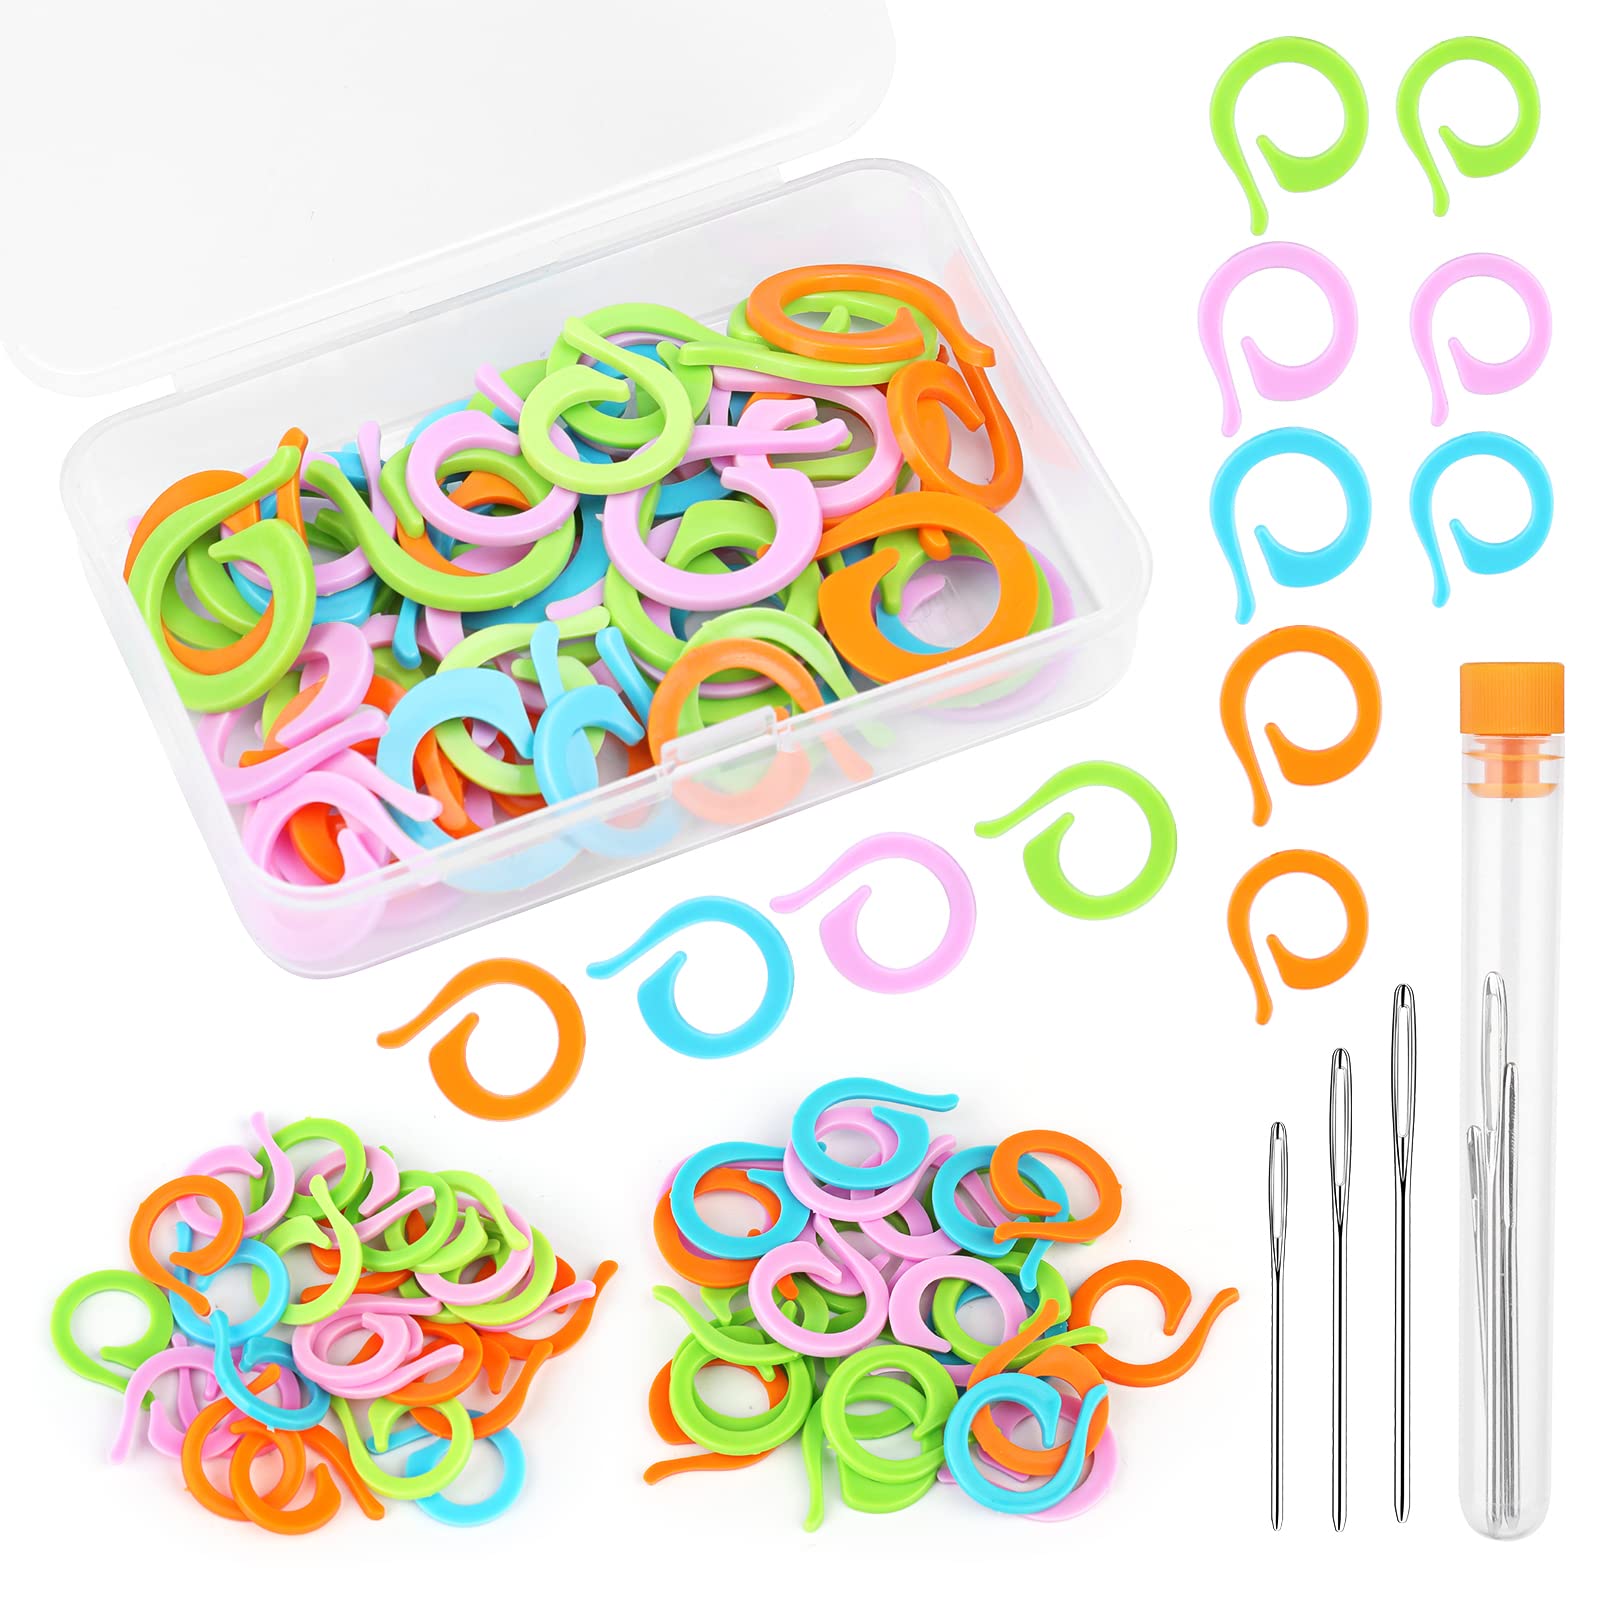 Yizzvb 50 Pcs Crochet Stitch Markers Knitting Stitch Rings with Plastic Box  Crochet Ring Crochet Locking Sewing Accessories and Large-Eye Blunt Needles  for DIY Handmade Crafts 50pcs